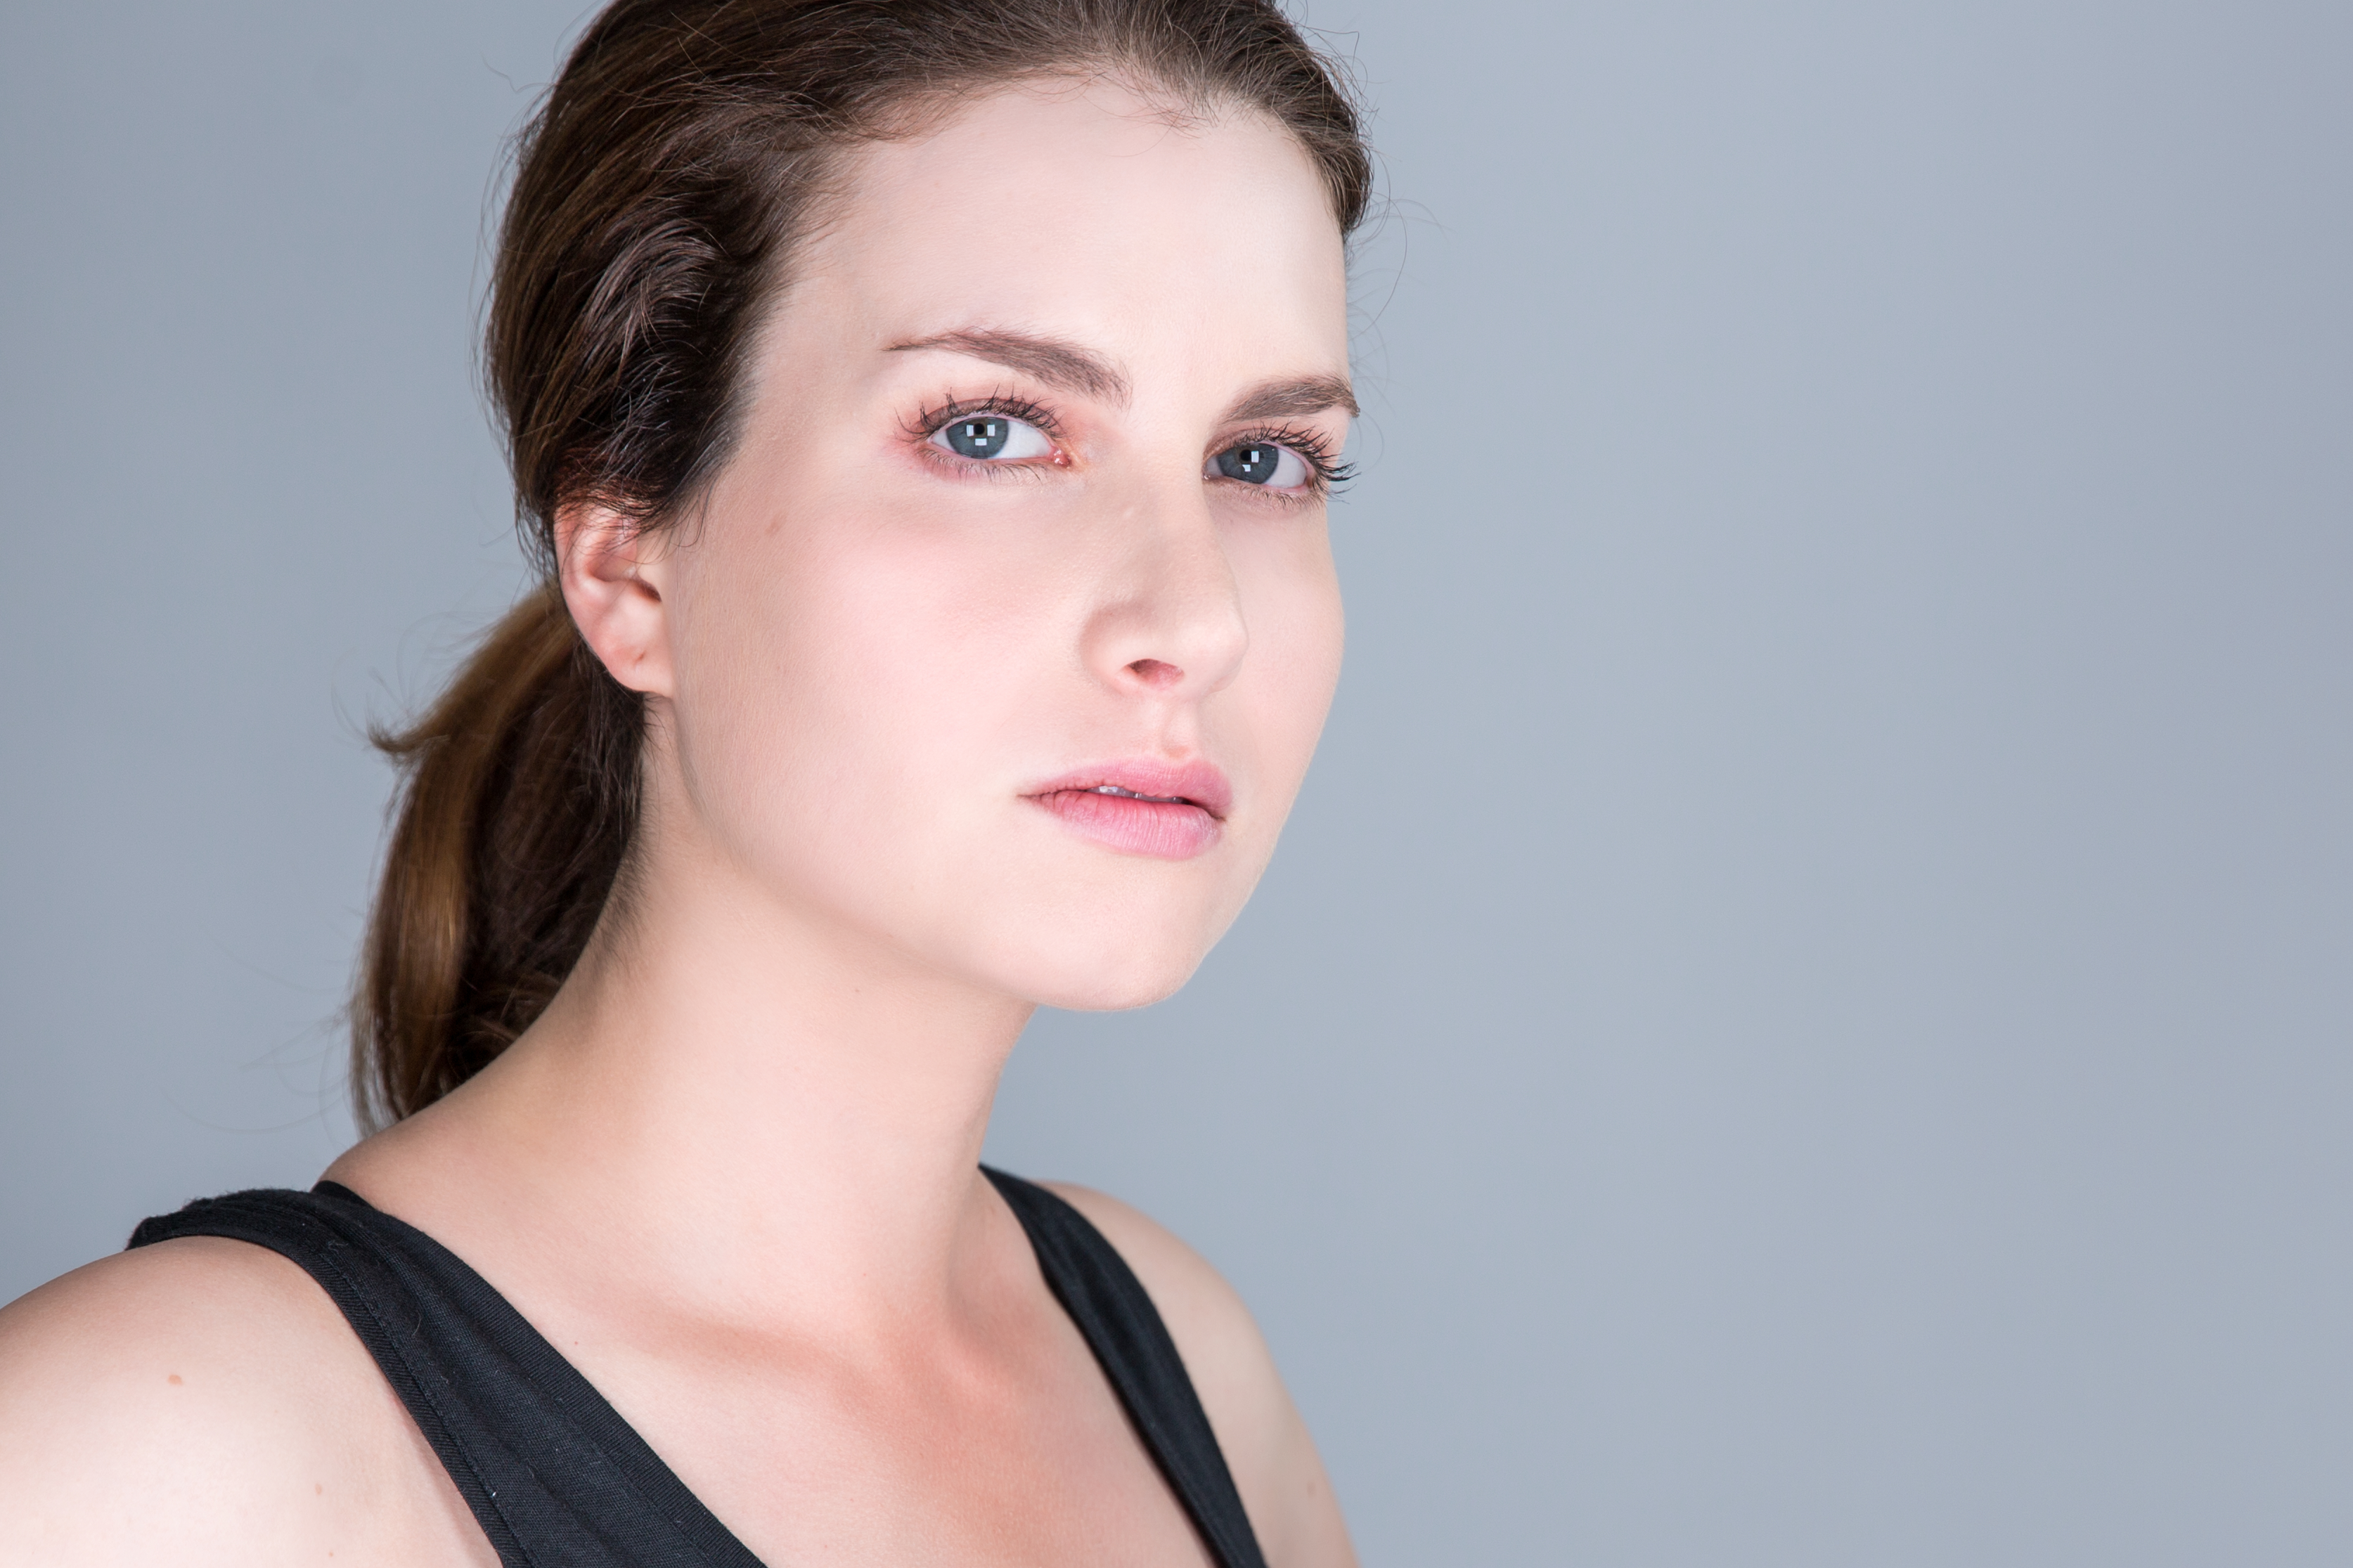 Cole Phoenix Theatrical Headshot. Actress, Artist-Singer/Songwriter, Writer, Script-writer and Producer.